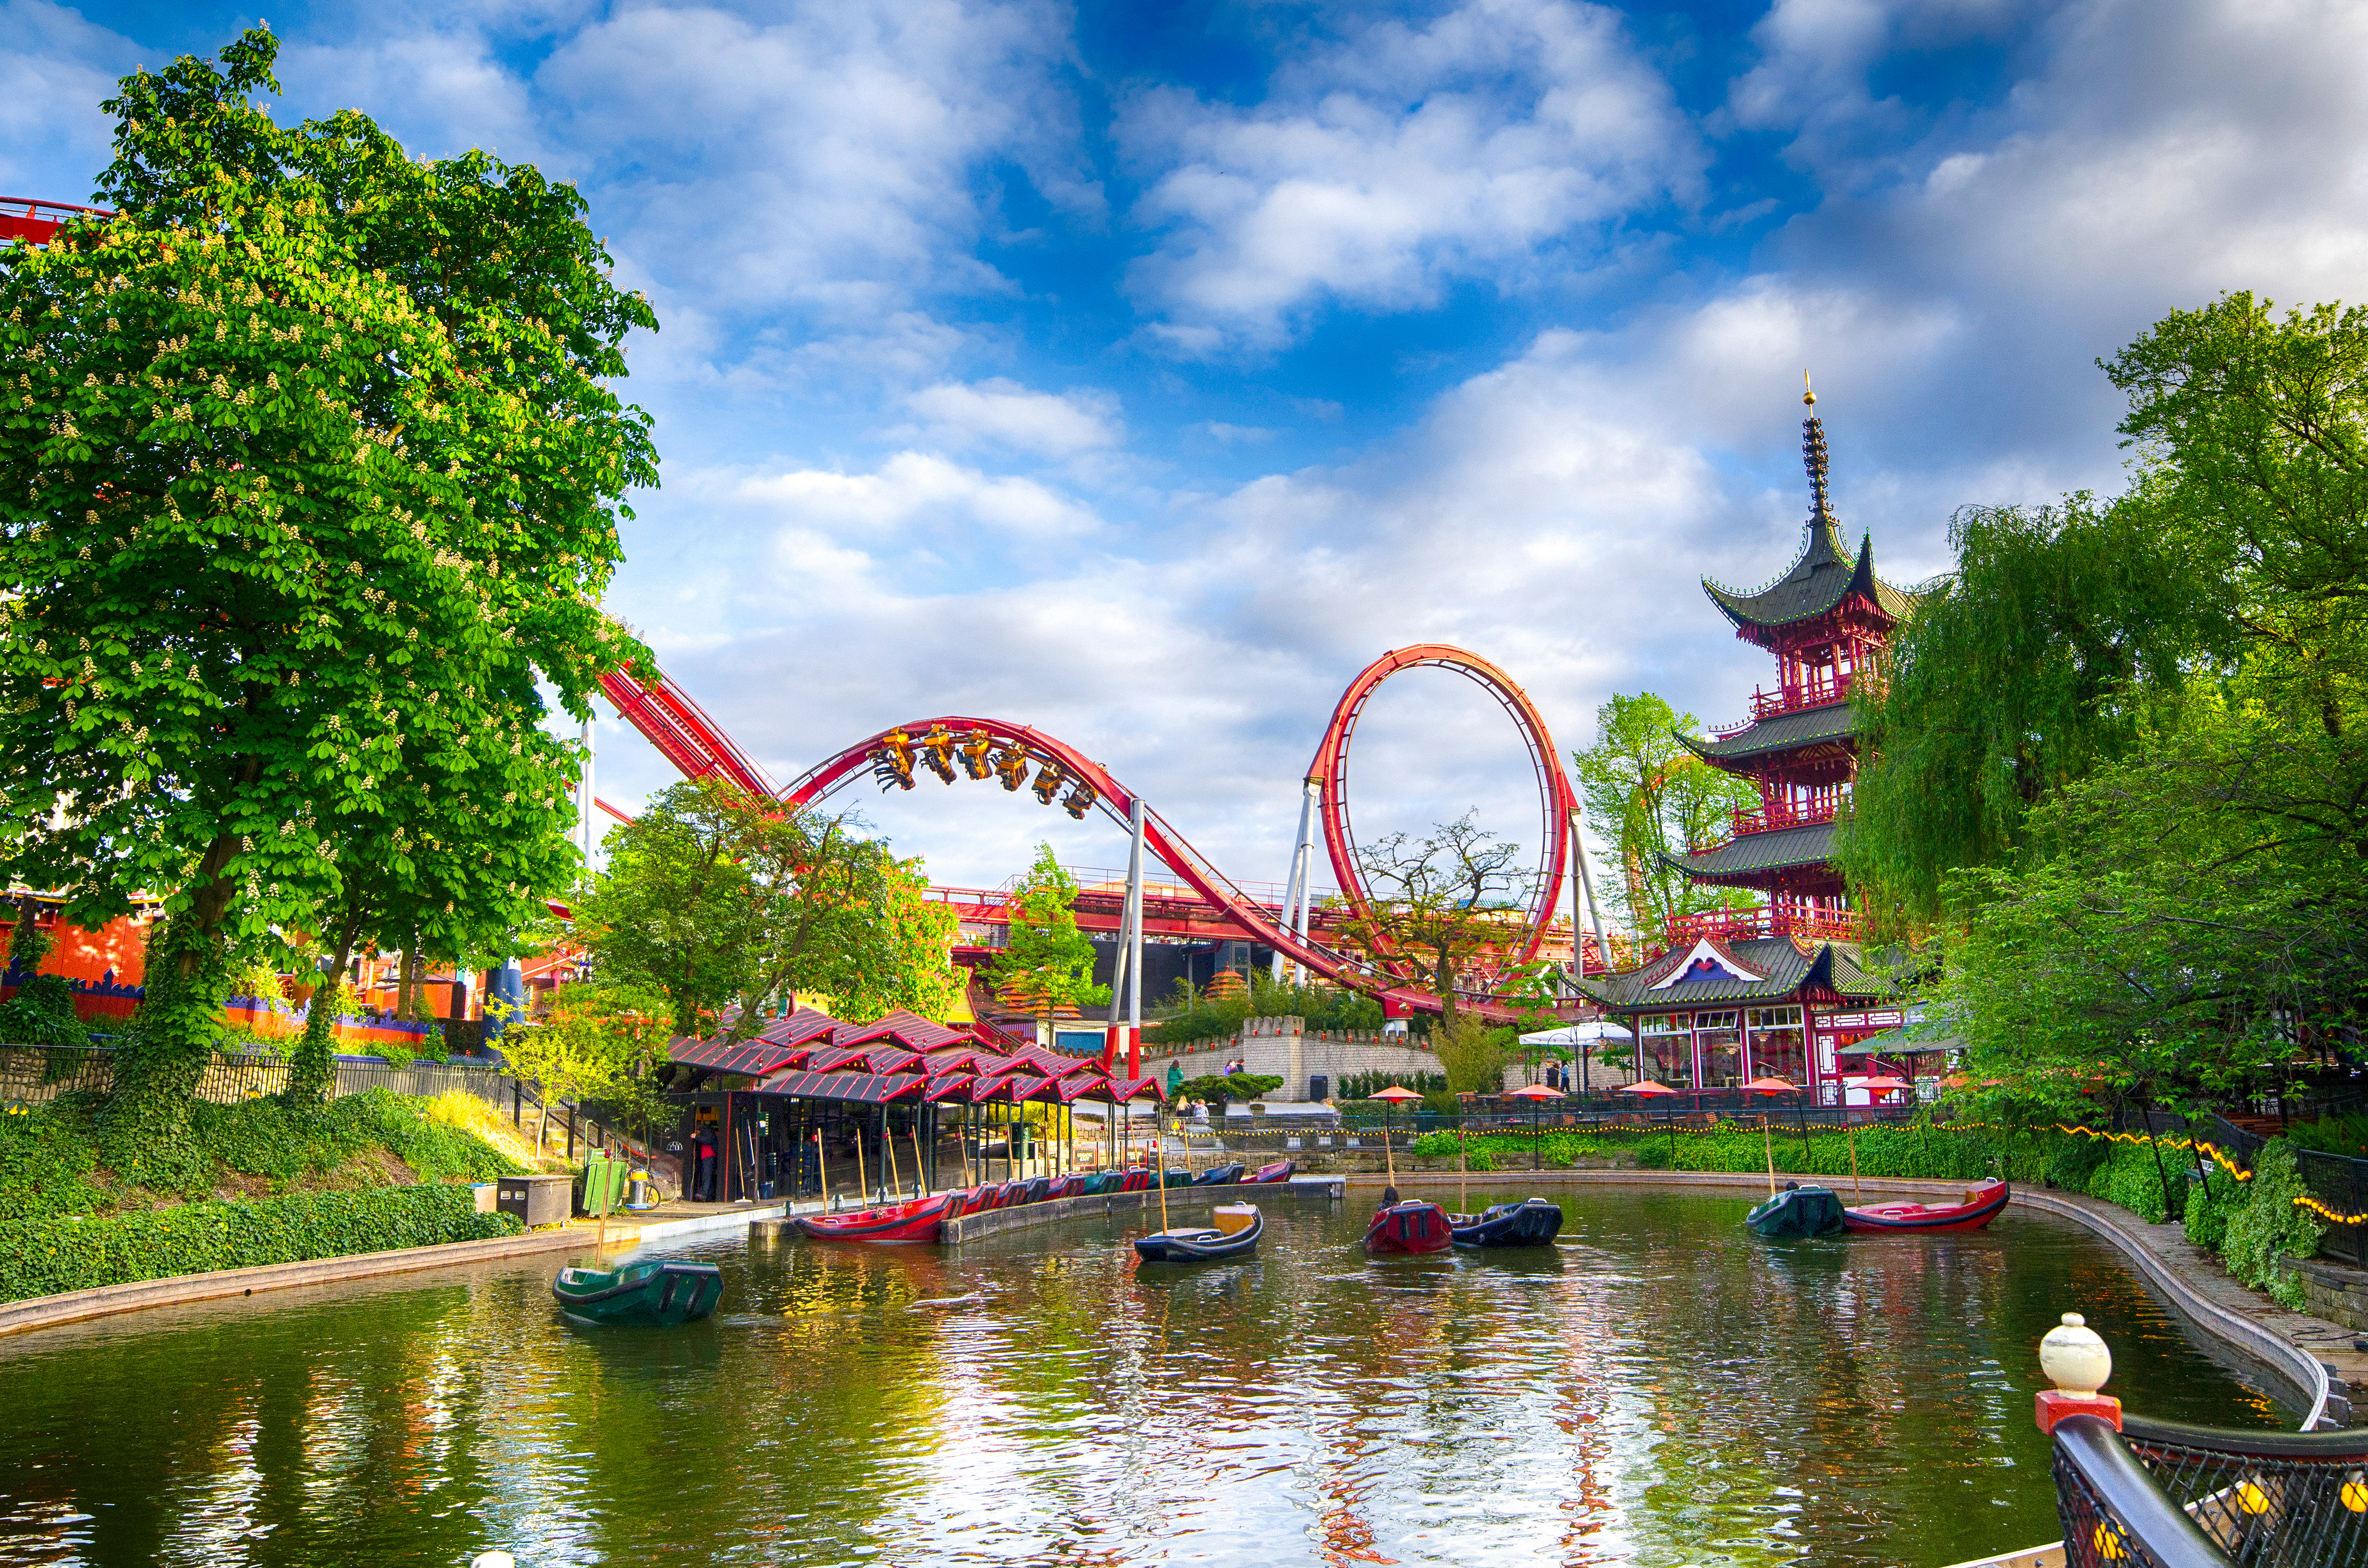 Tivoli Gardens in Denmark, one of the most interested theme parks in the world.